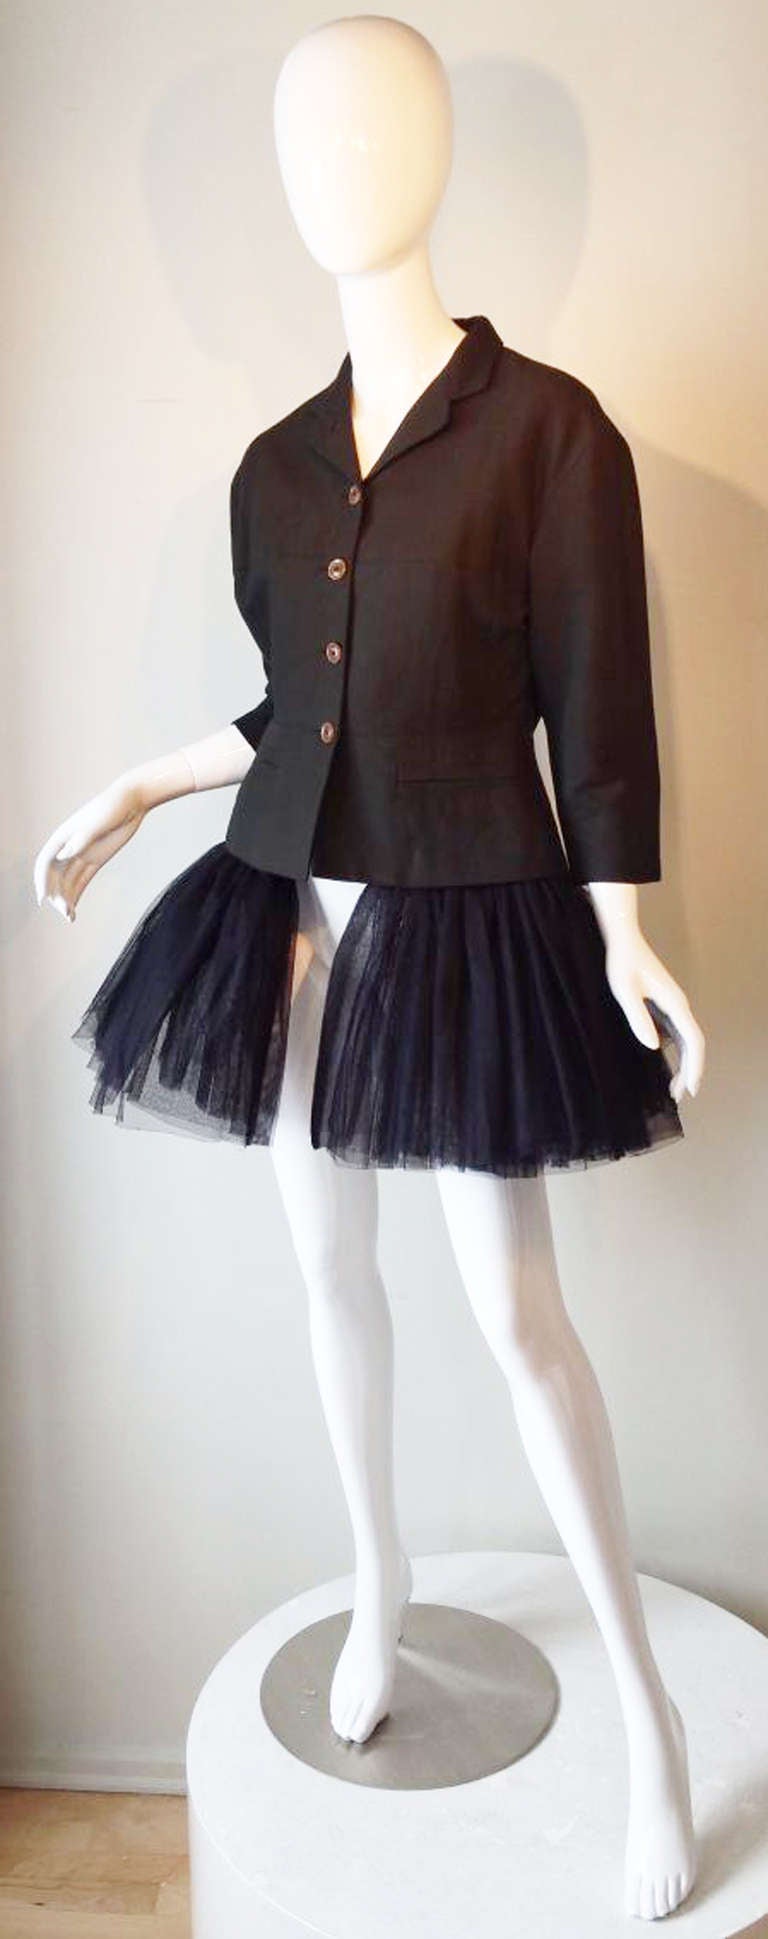 A fine and rare vintage Jean Paul Gaultier tutu jacket. Iconic item features a traditional cut blaze with a zipper attached triple layer tutu skirt. Item fully lined with button front closure. Pristine/Appears unworn.